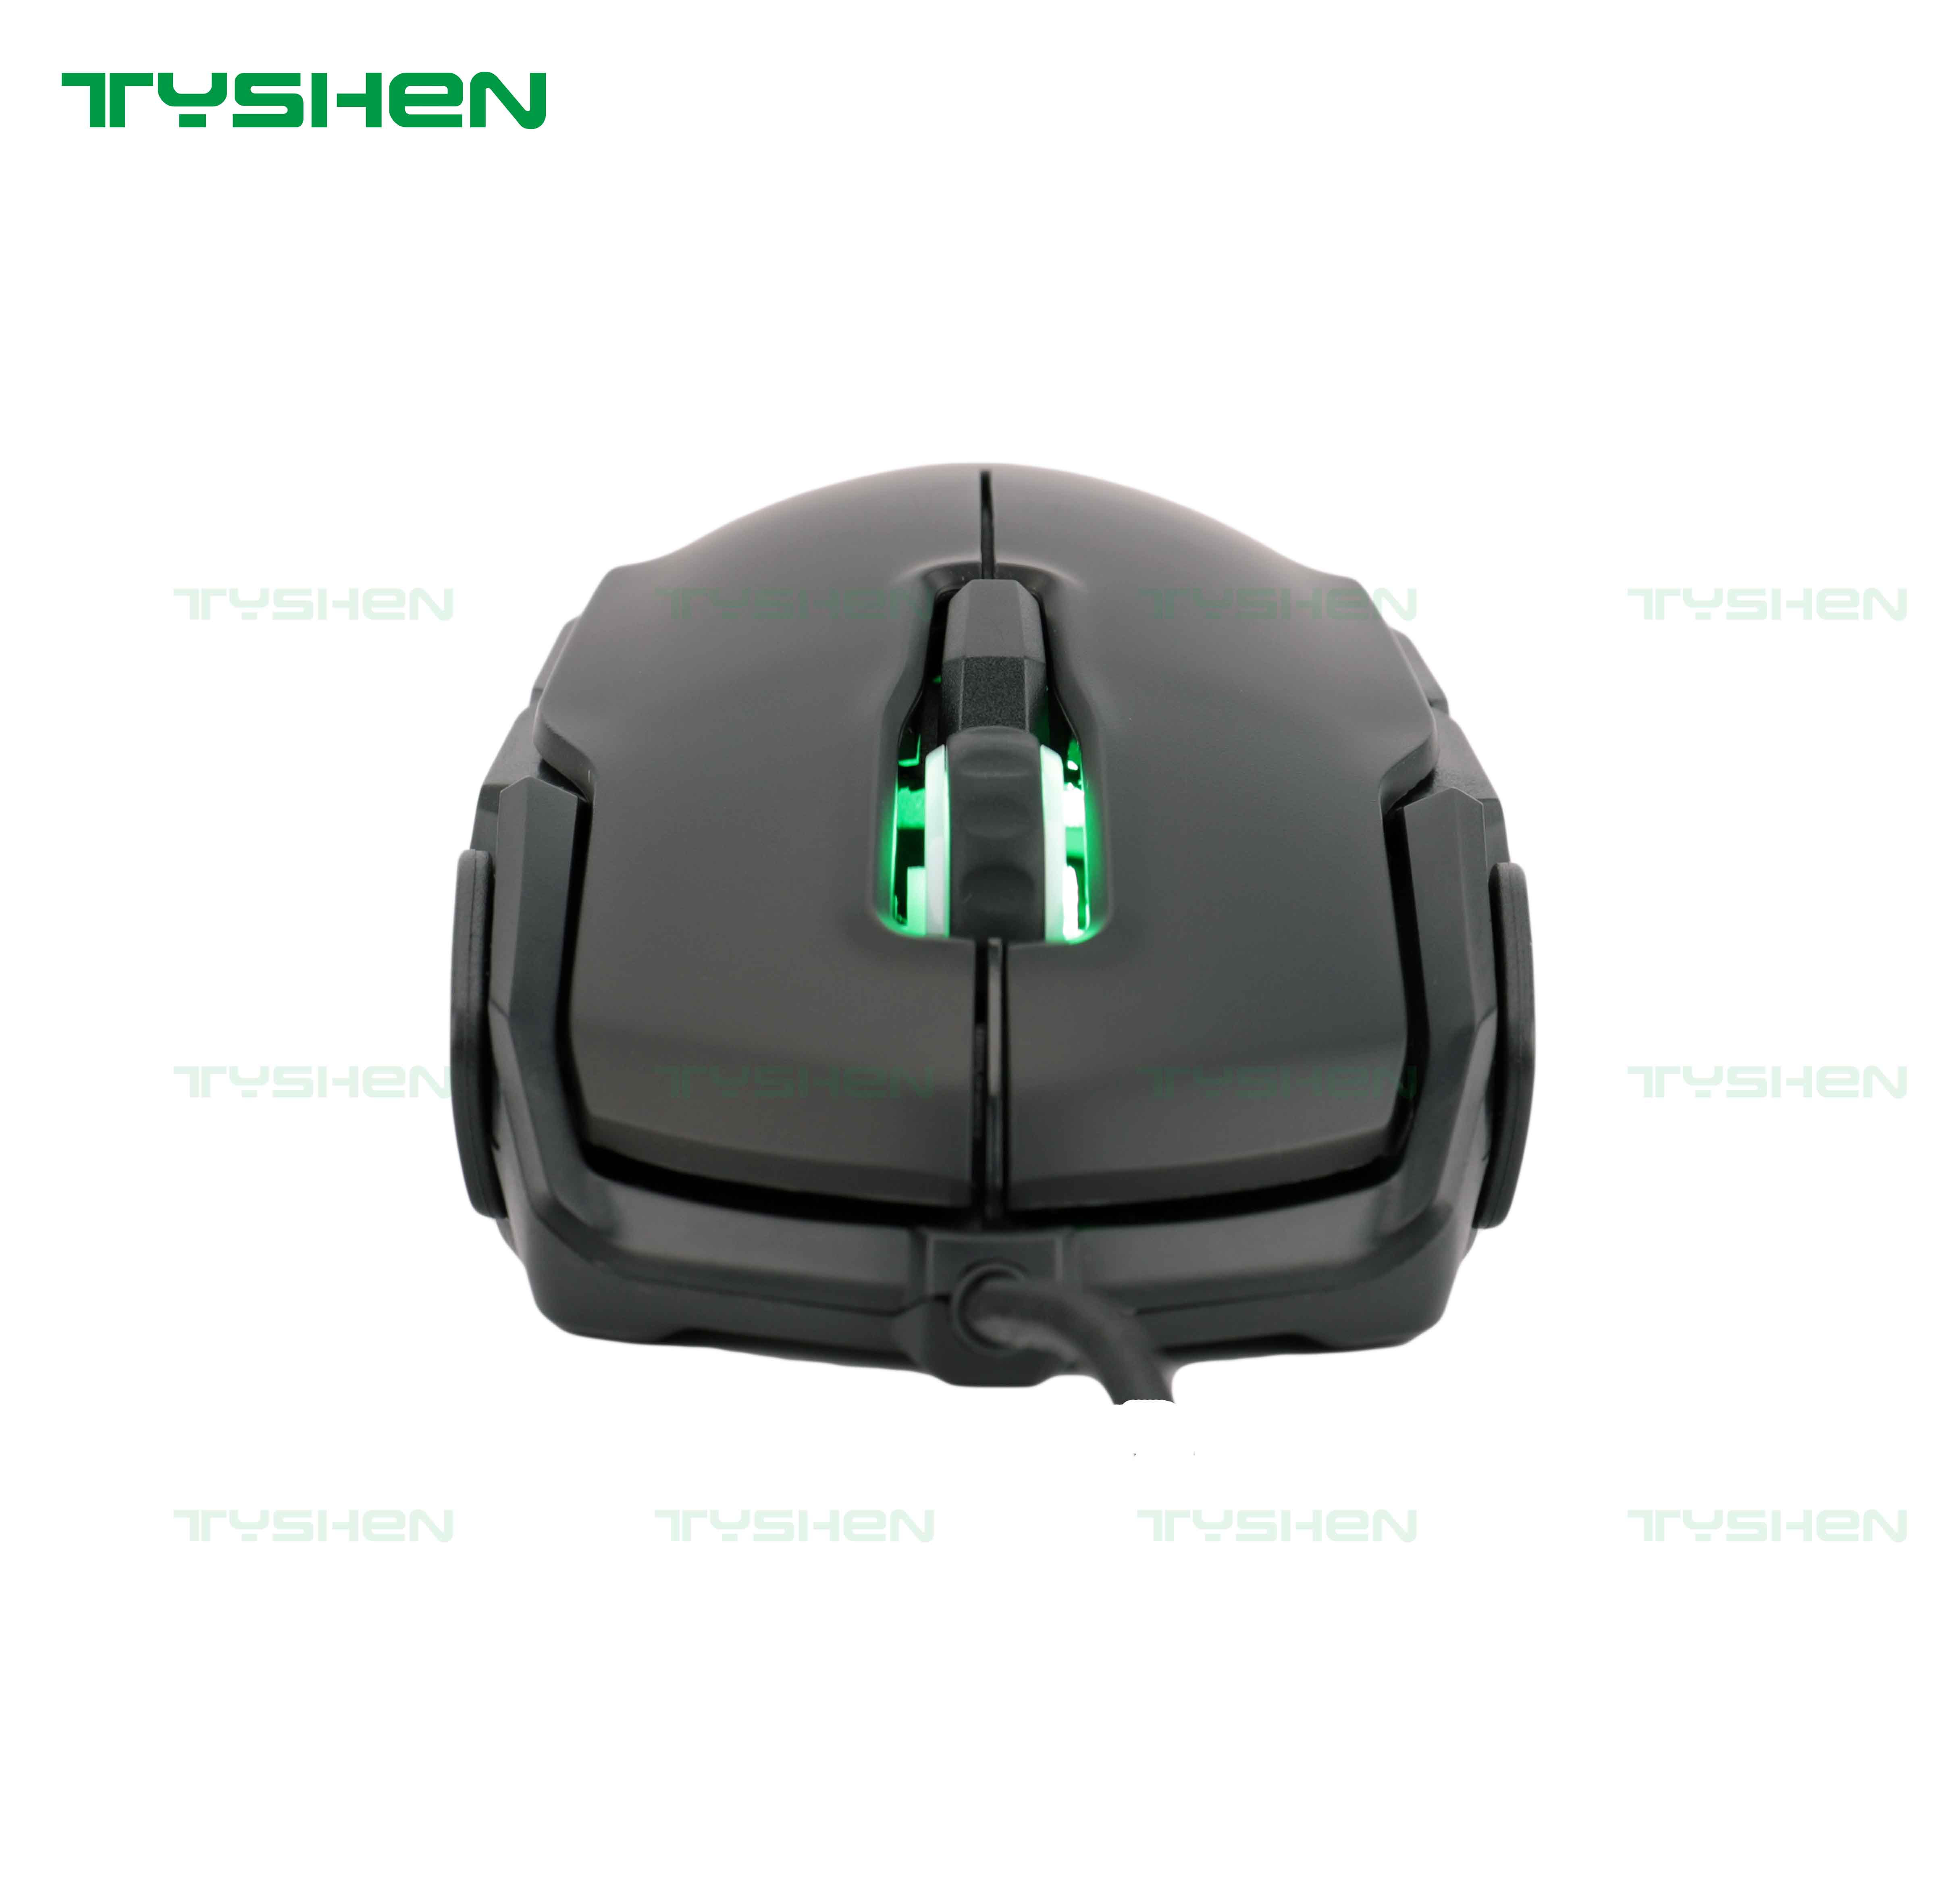 6D Computer Gaming Mouse, 800/1200/1600/3200 Dpi, Private Model